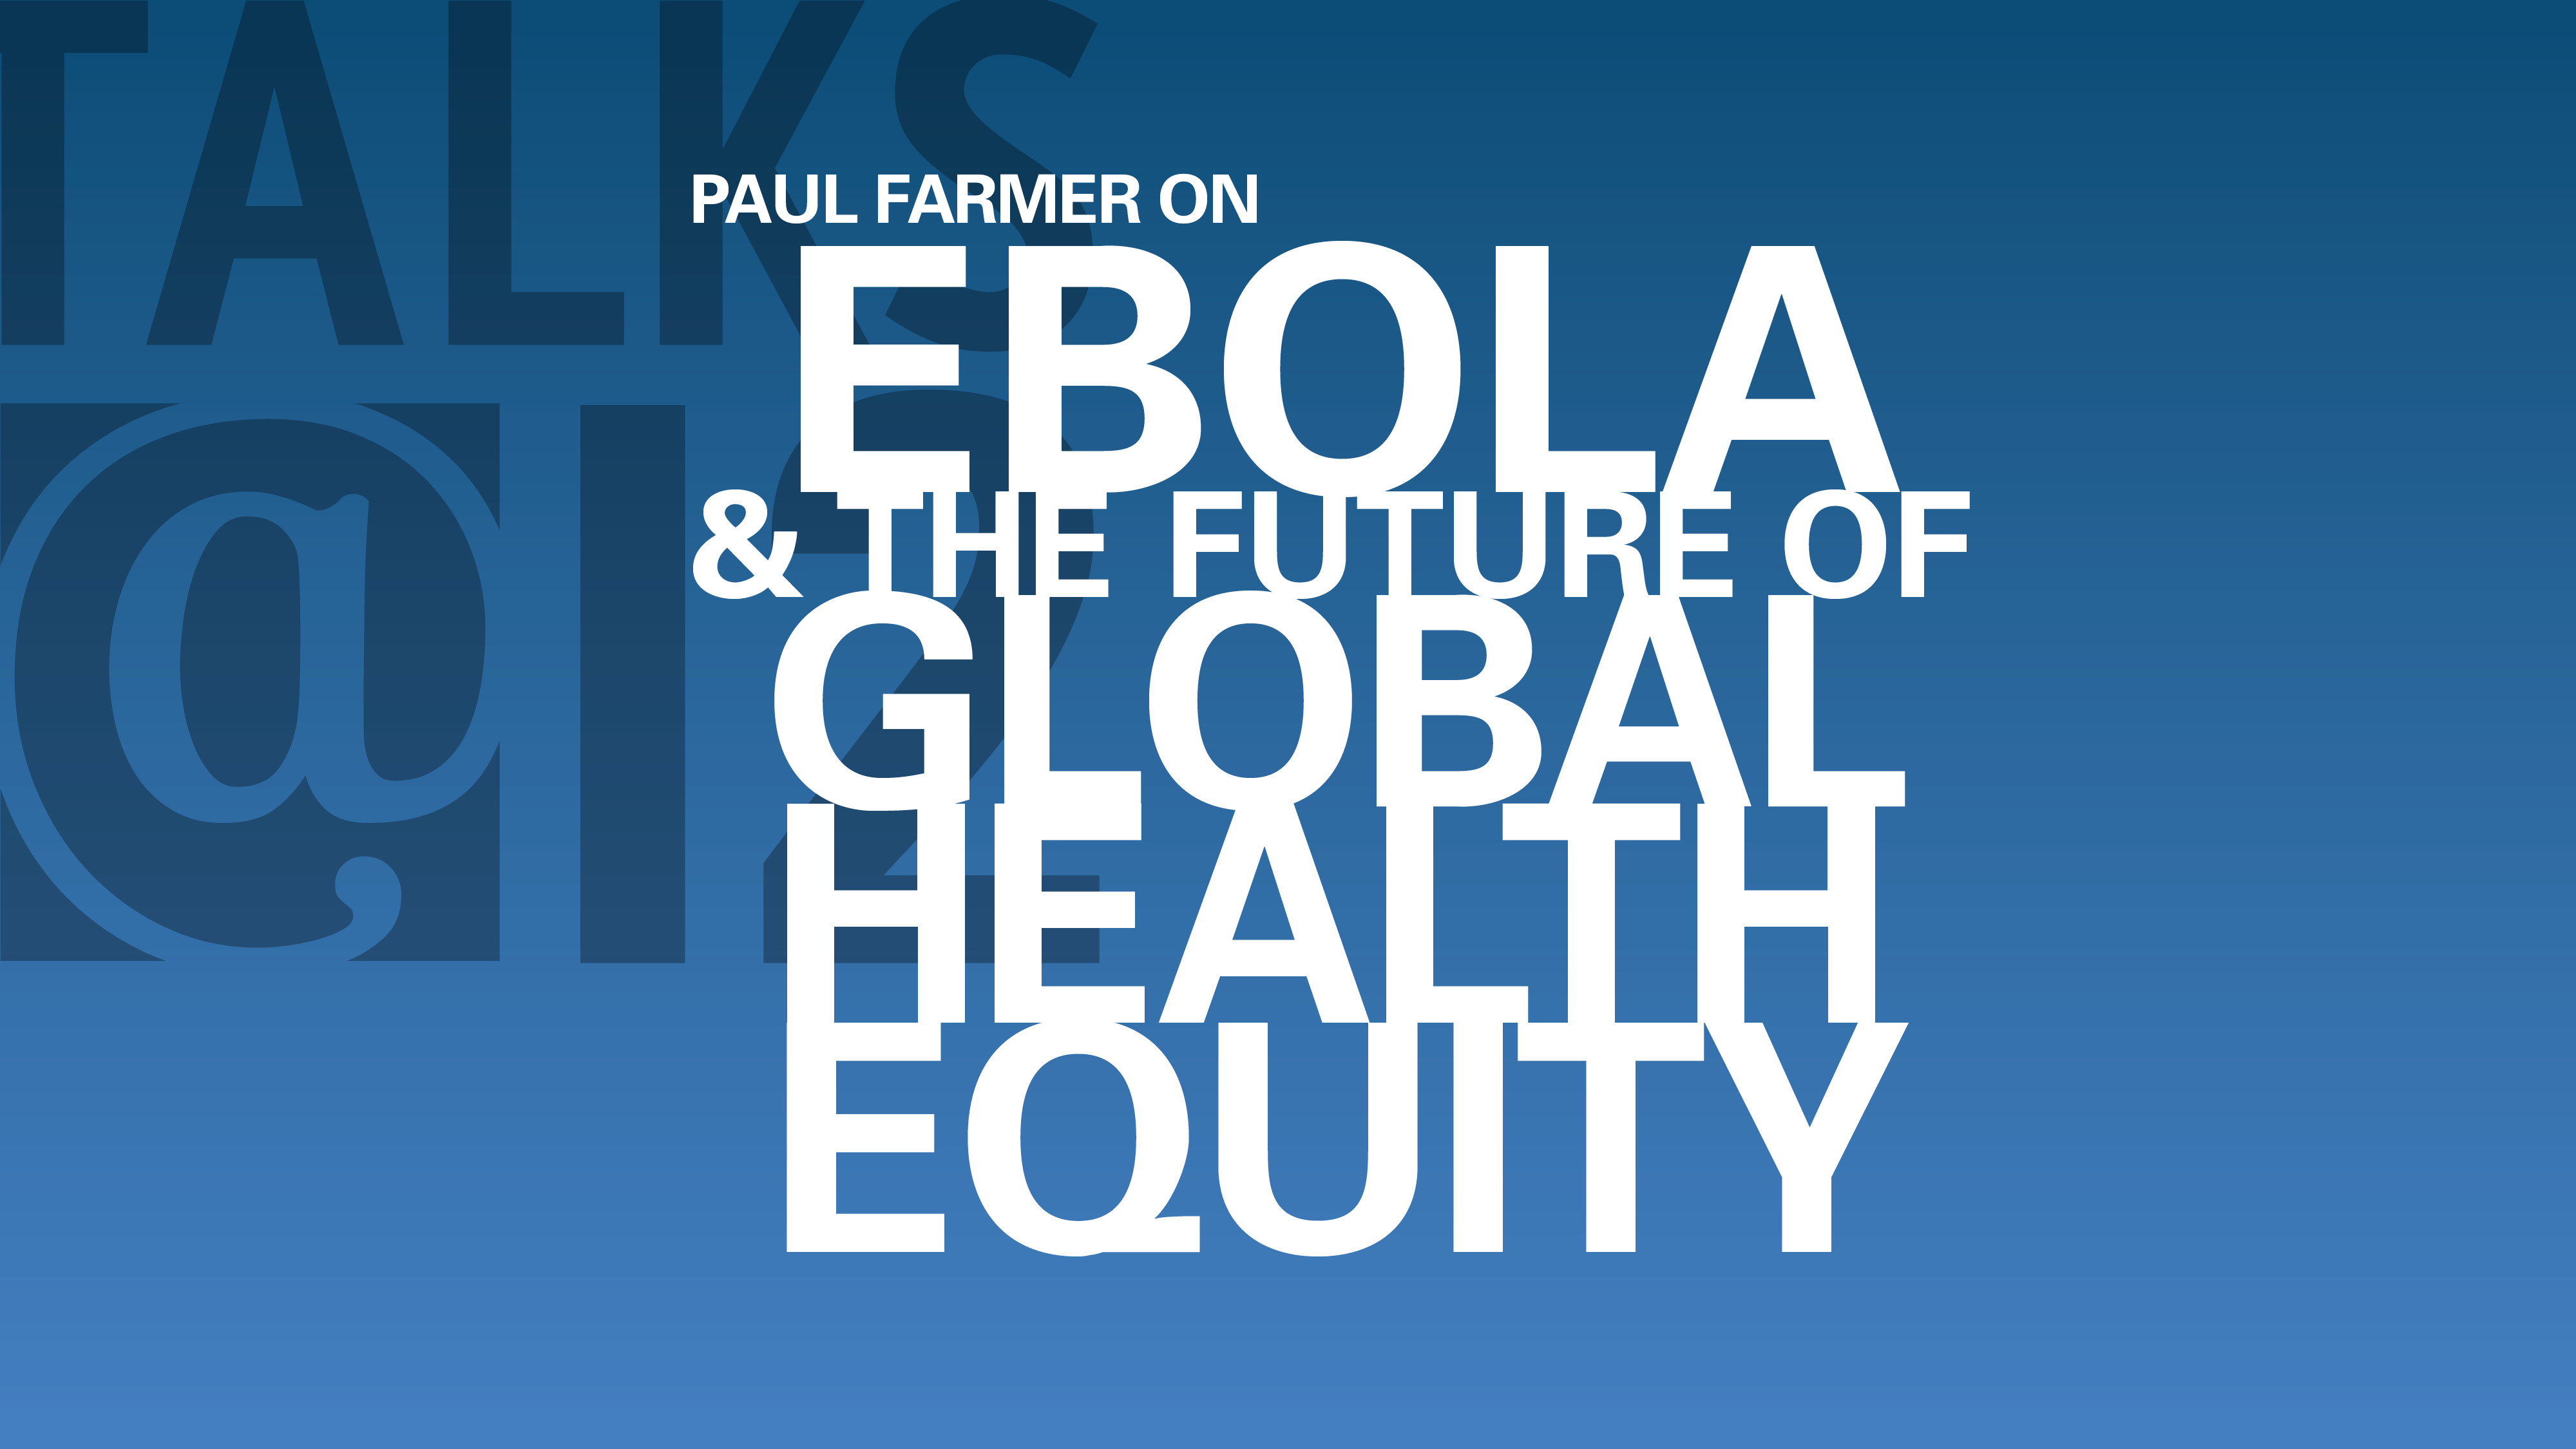 Ebola and the Future of Global Health Equity